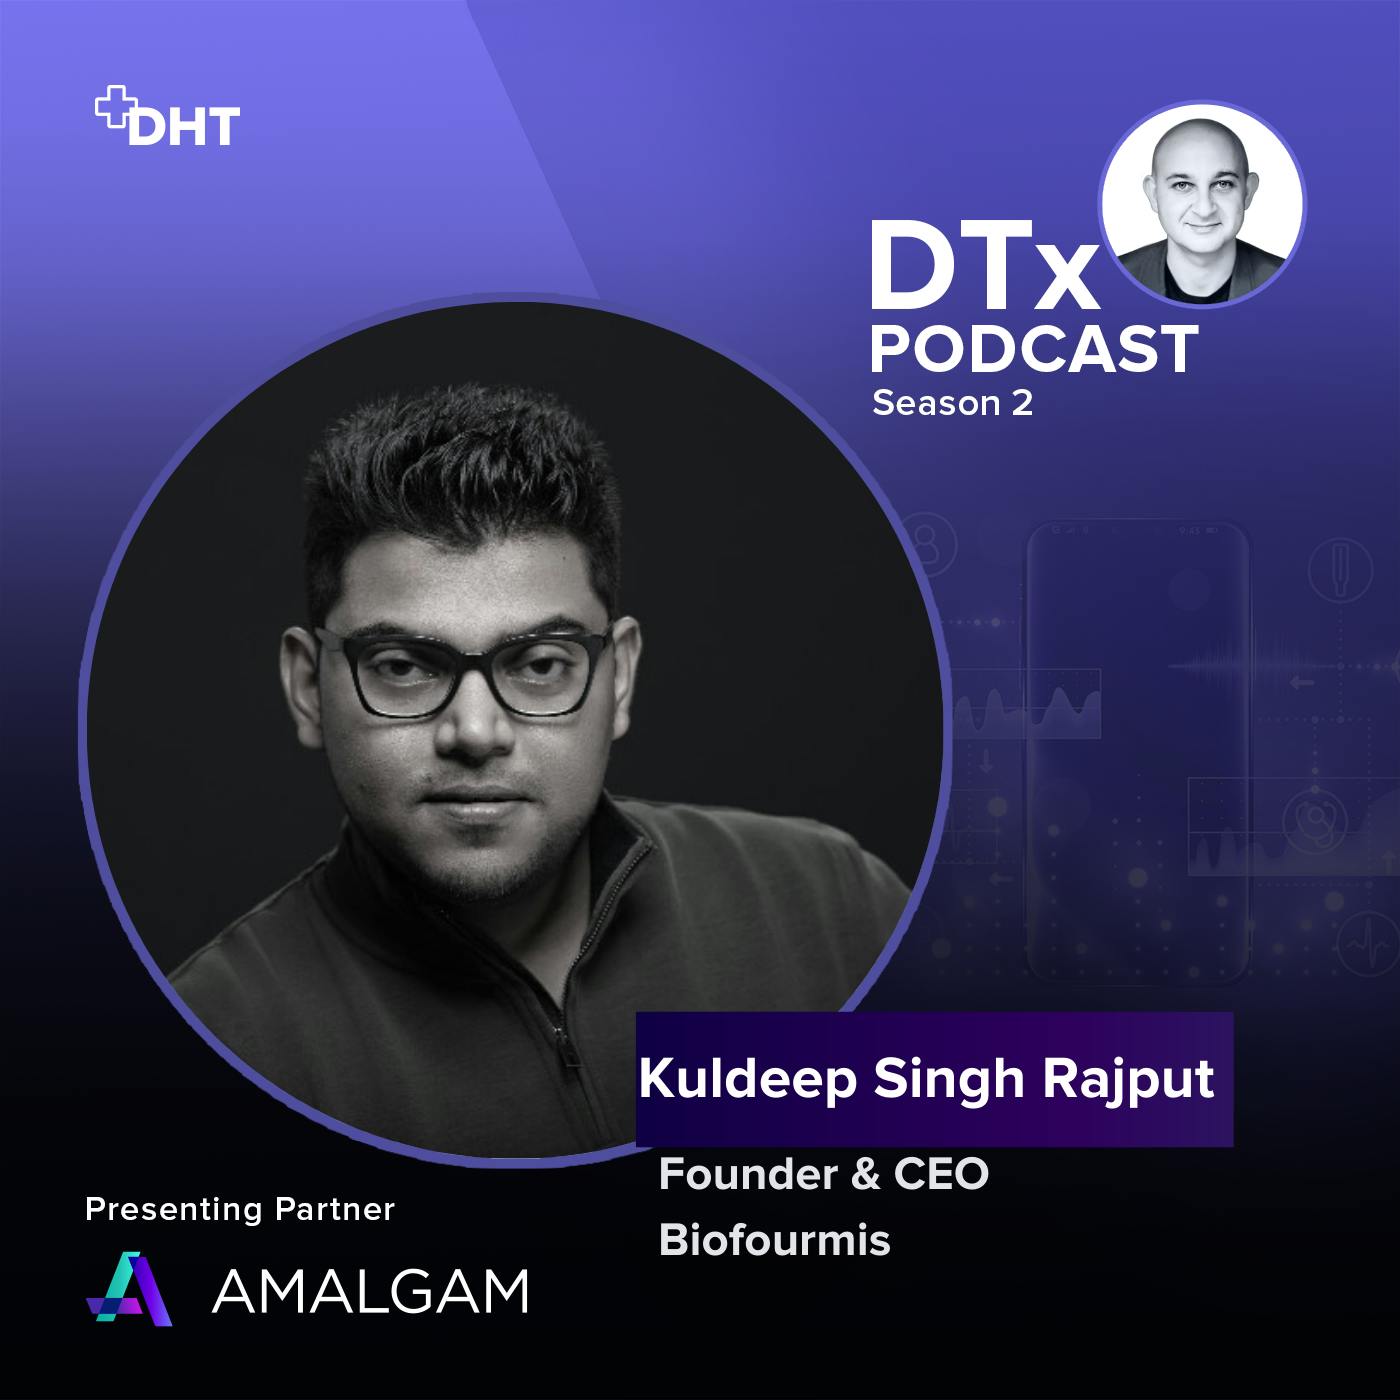 Ep32: Data Driven Healthcare Services: Kuldeep Singh Rajput Shares Insights on Evolving DTx into Virtual Care Platforms